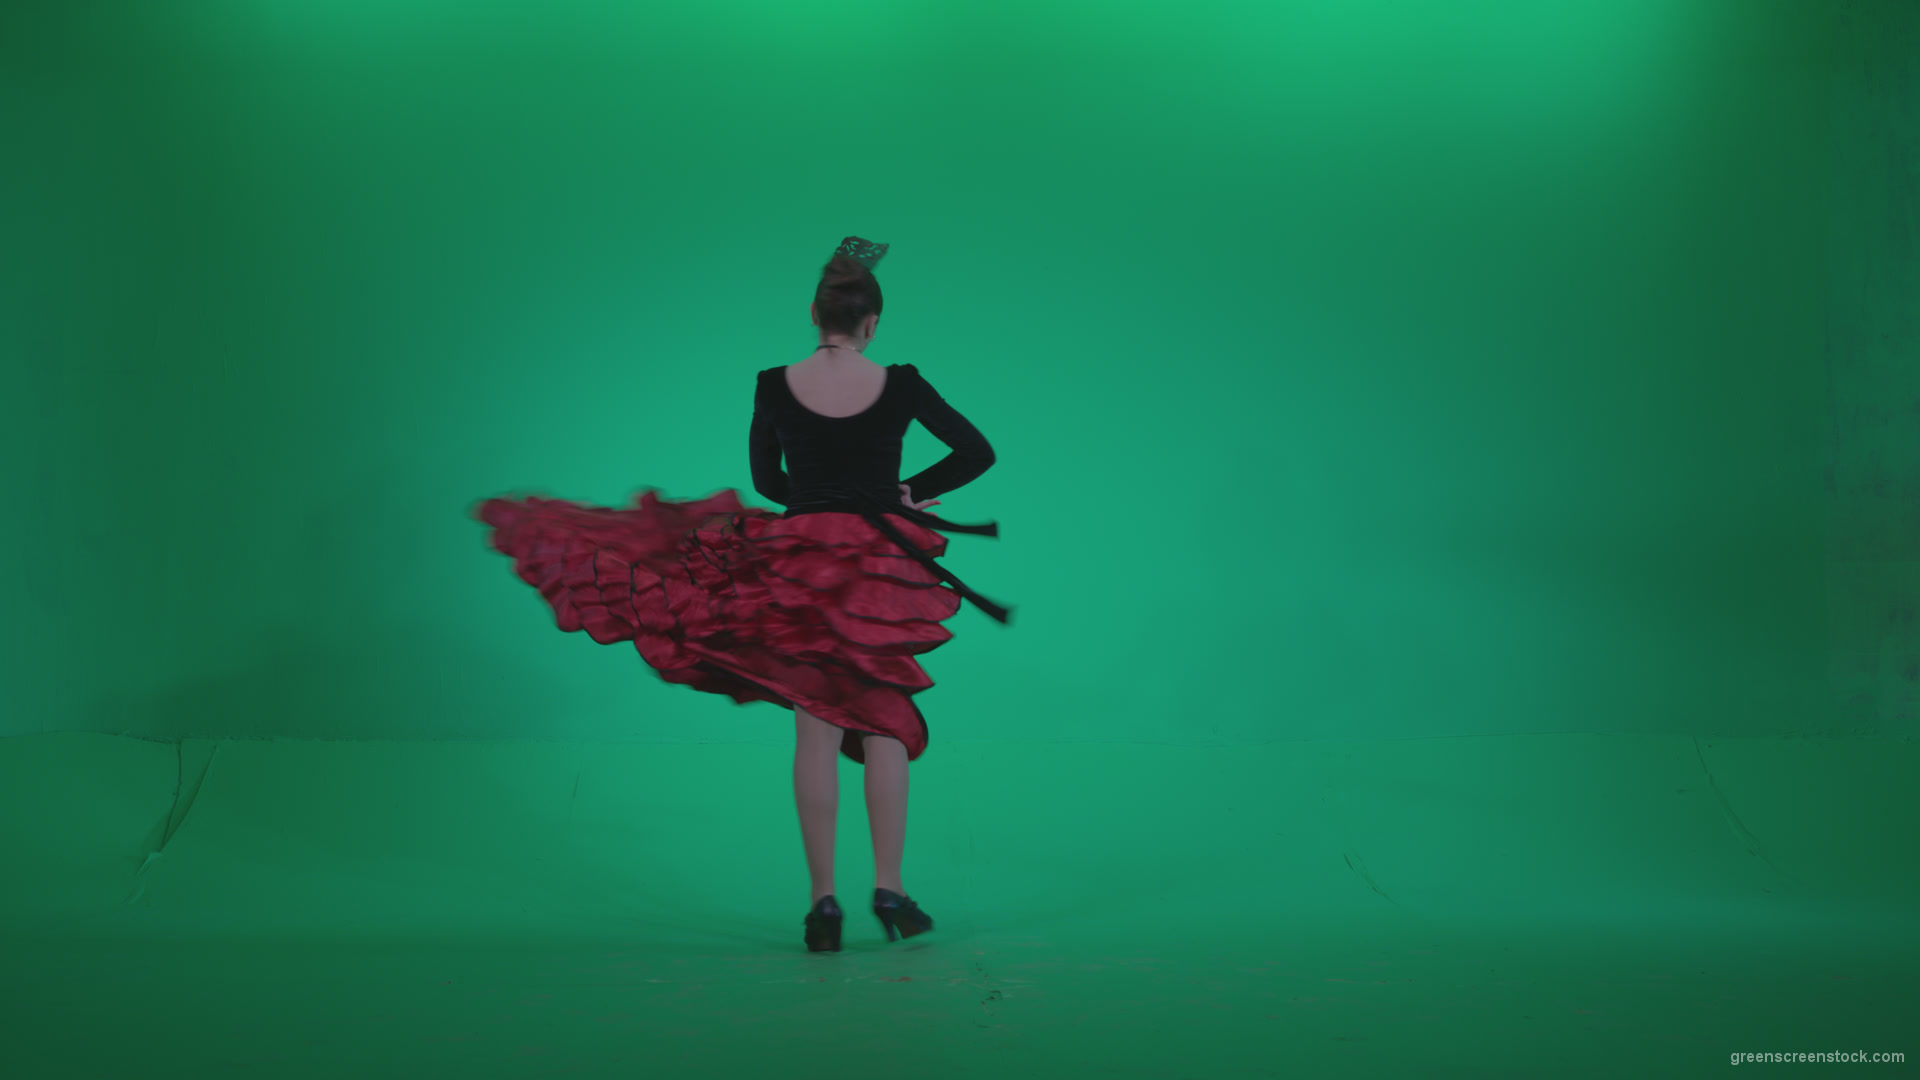 Flamenco-Red-and-Black-Dress-rb6-Green-Screen-Video-Footage_004 Green Screen Stock